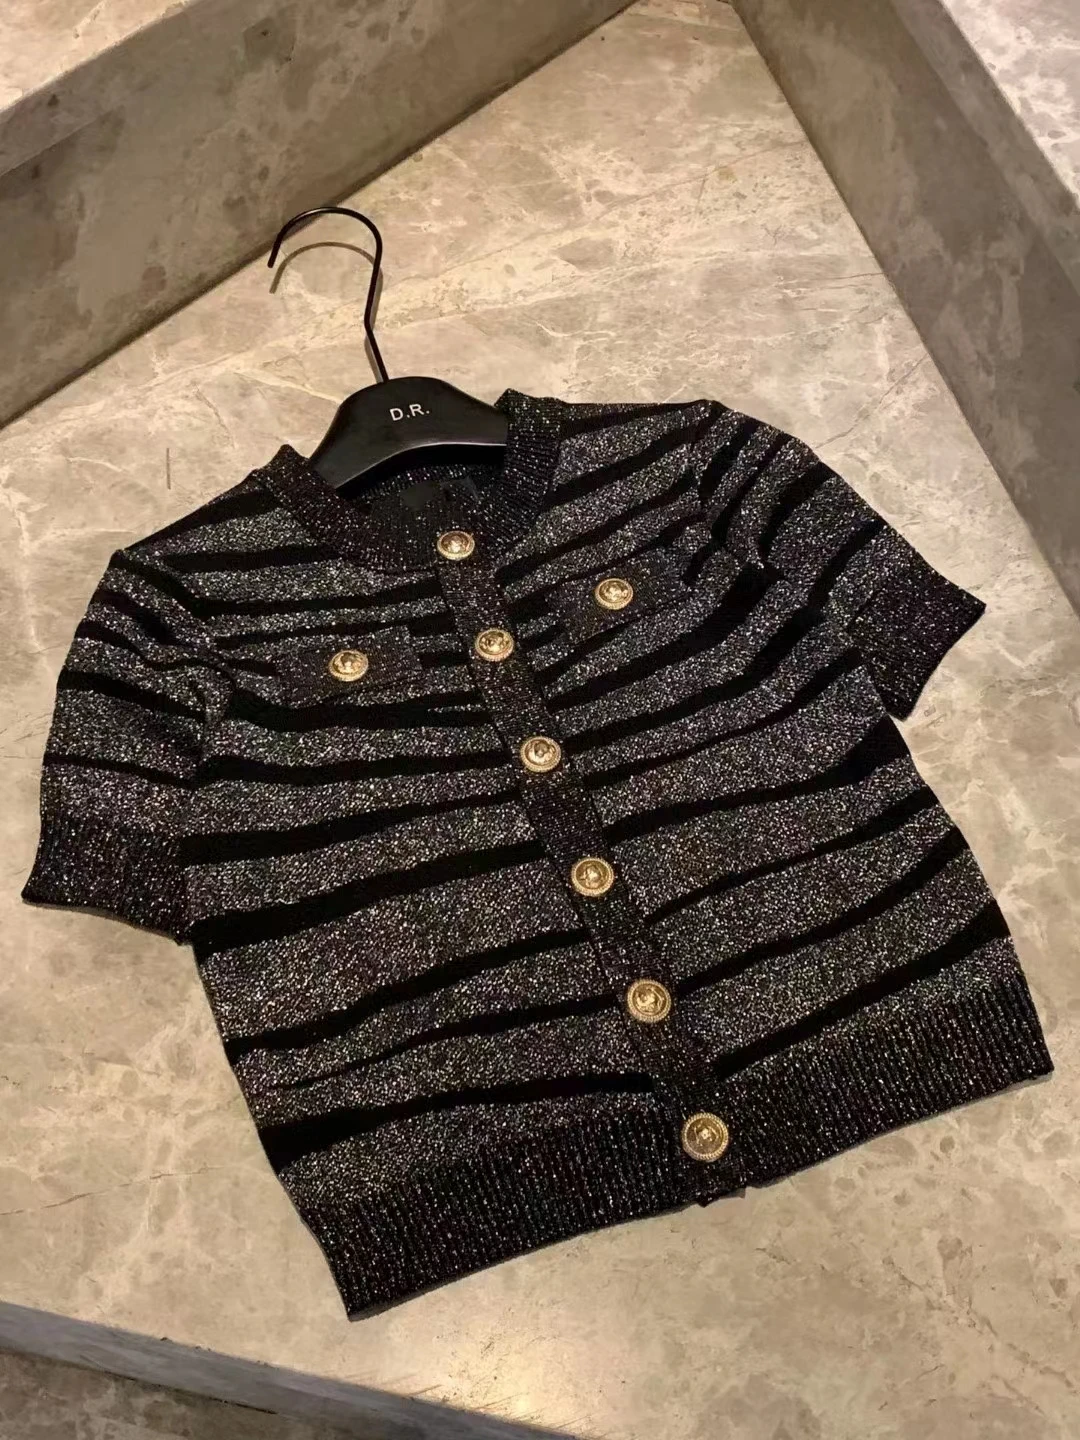 

Summer Autumn New Celebrity Gold Button Short Sleeved Knitted Casual Top Women's Single Breasted Cardigan Striped Sweater F655